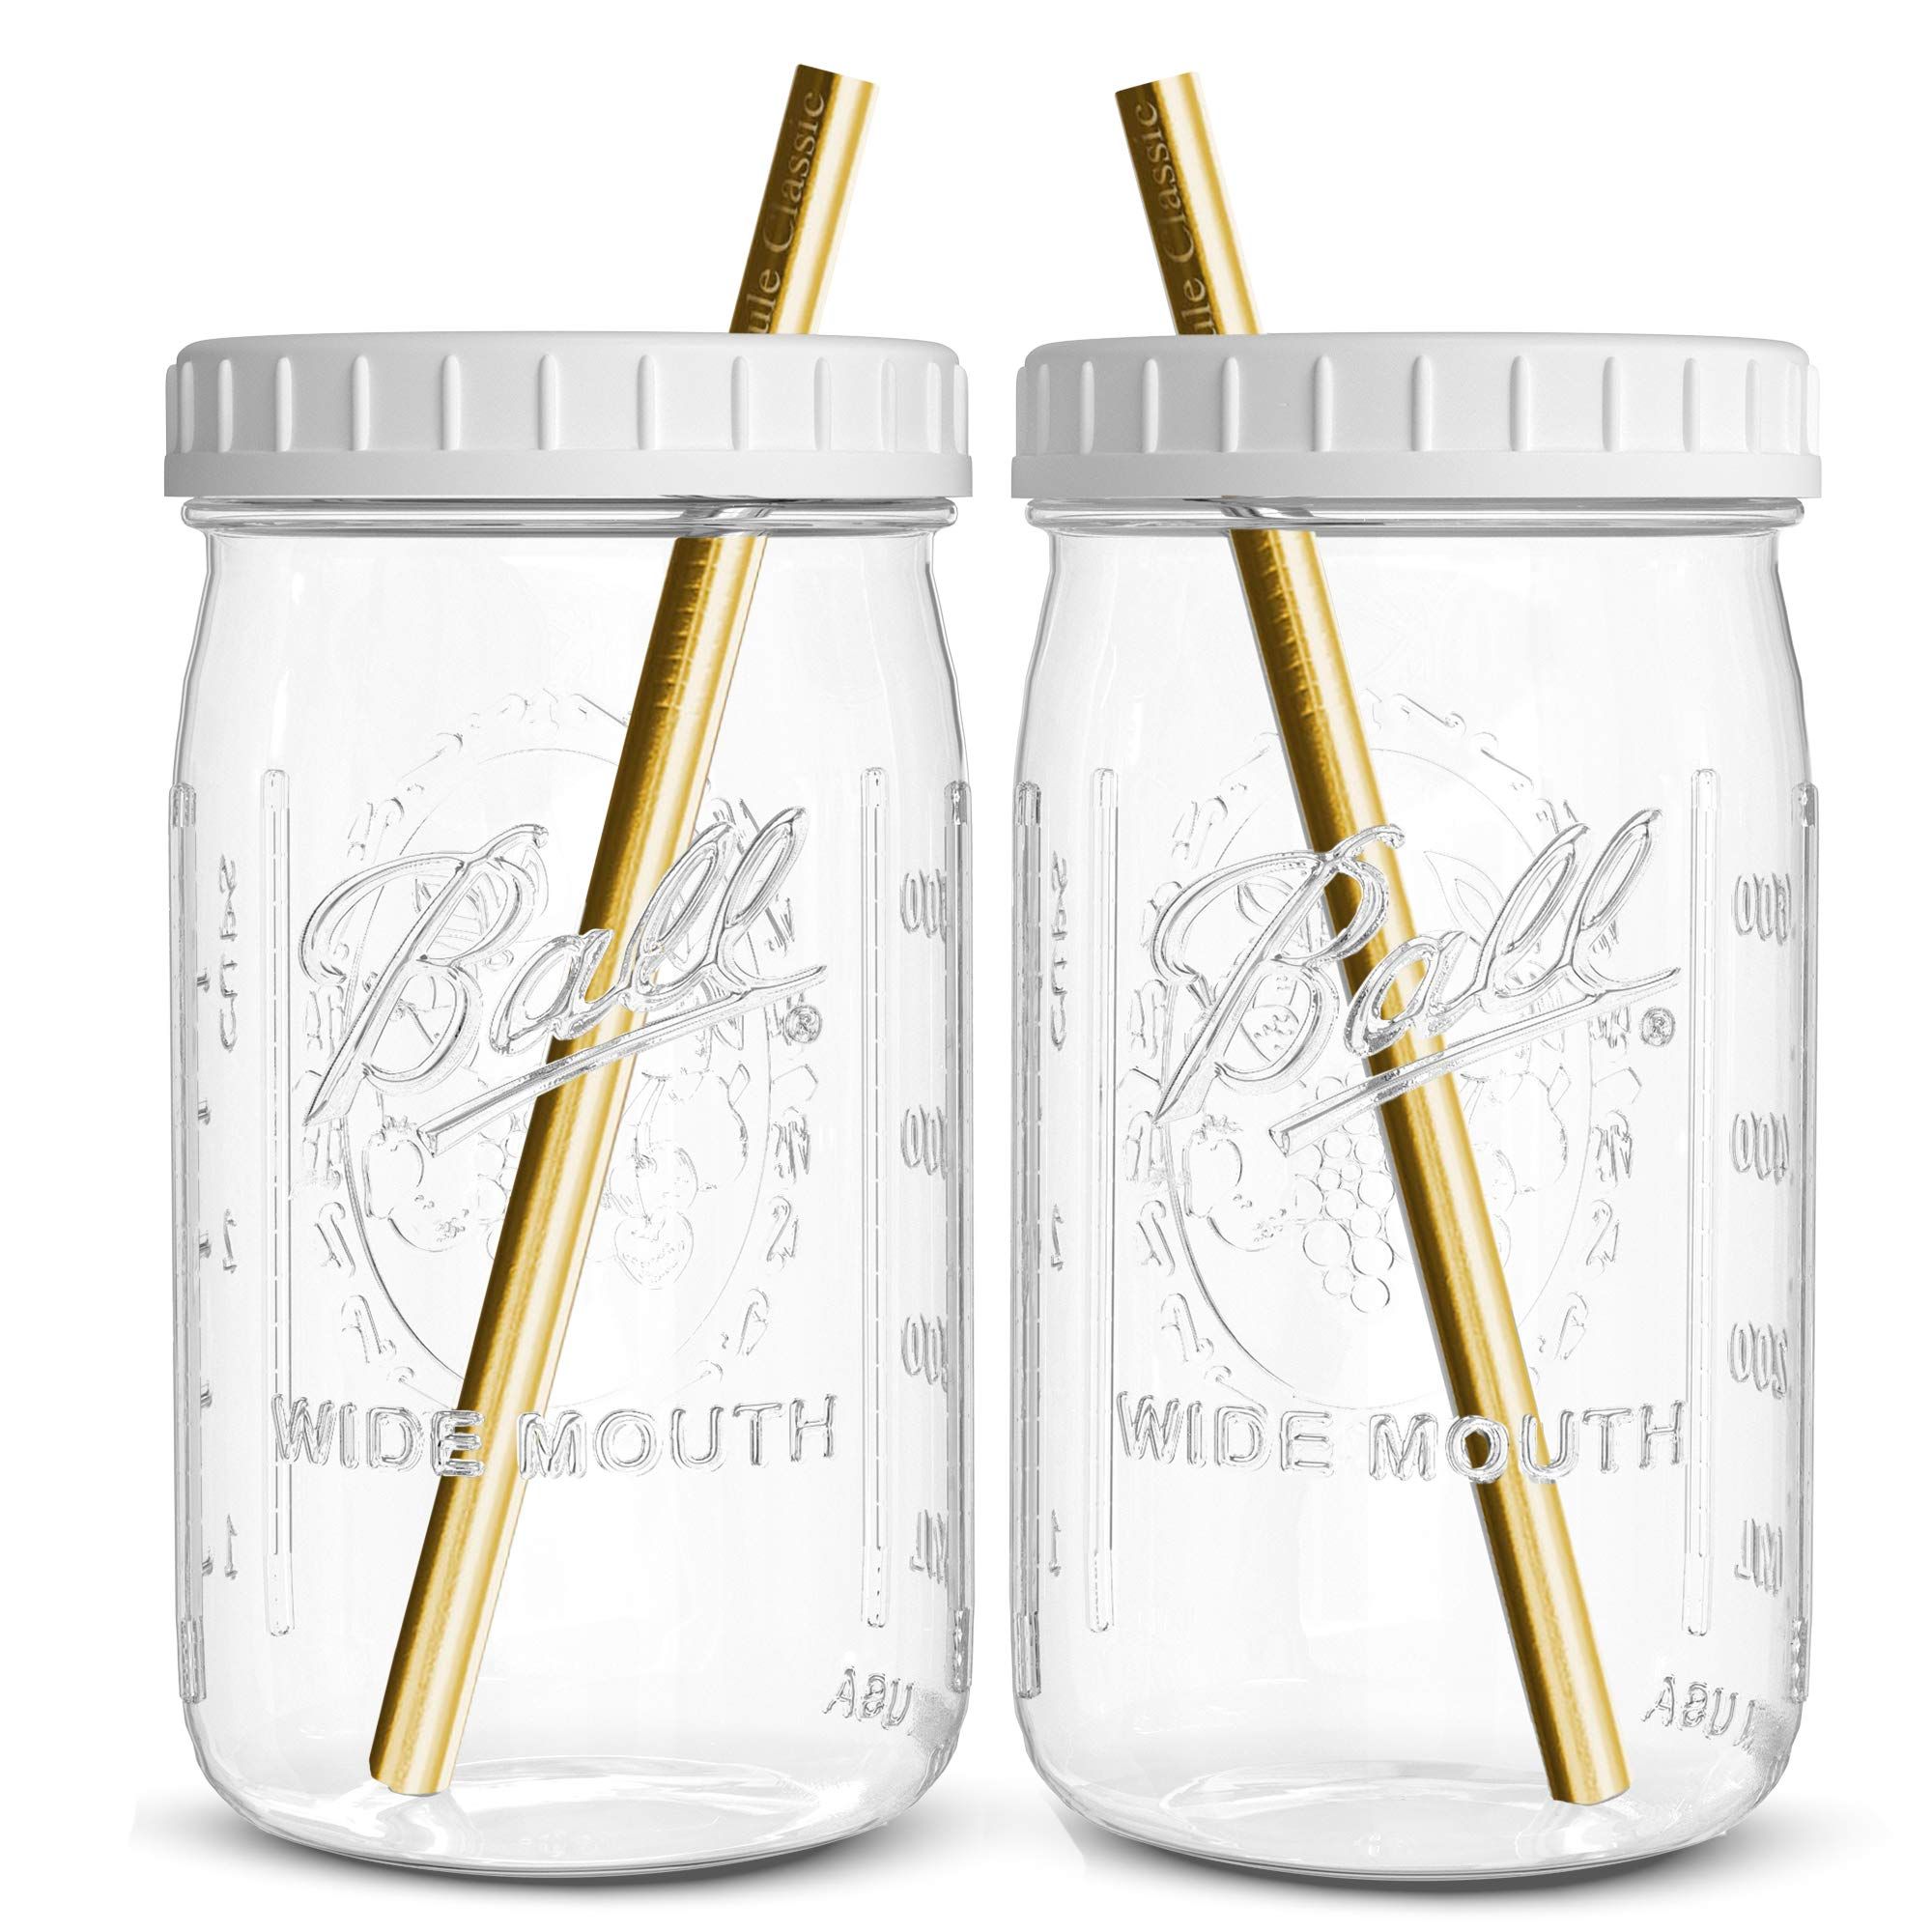 Reusable Wide Mouth Smoothie Cups Boba Tea Cups Bubble Tea Cups with Lids and Gold Straws Ball Mason | Amazon (US)